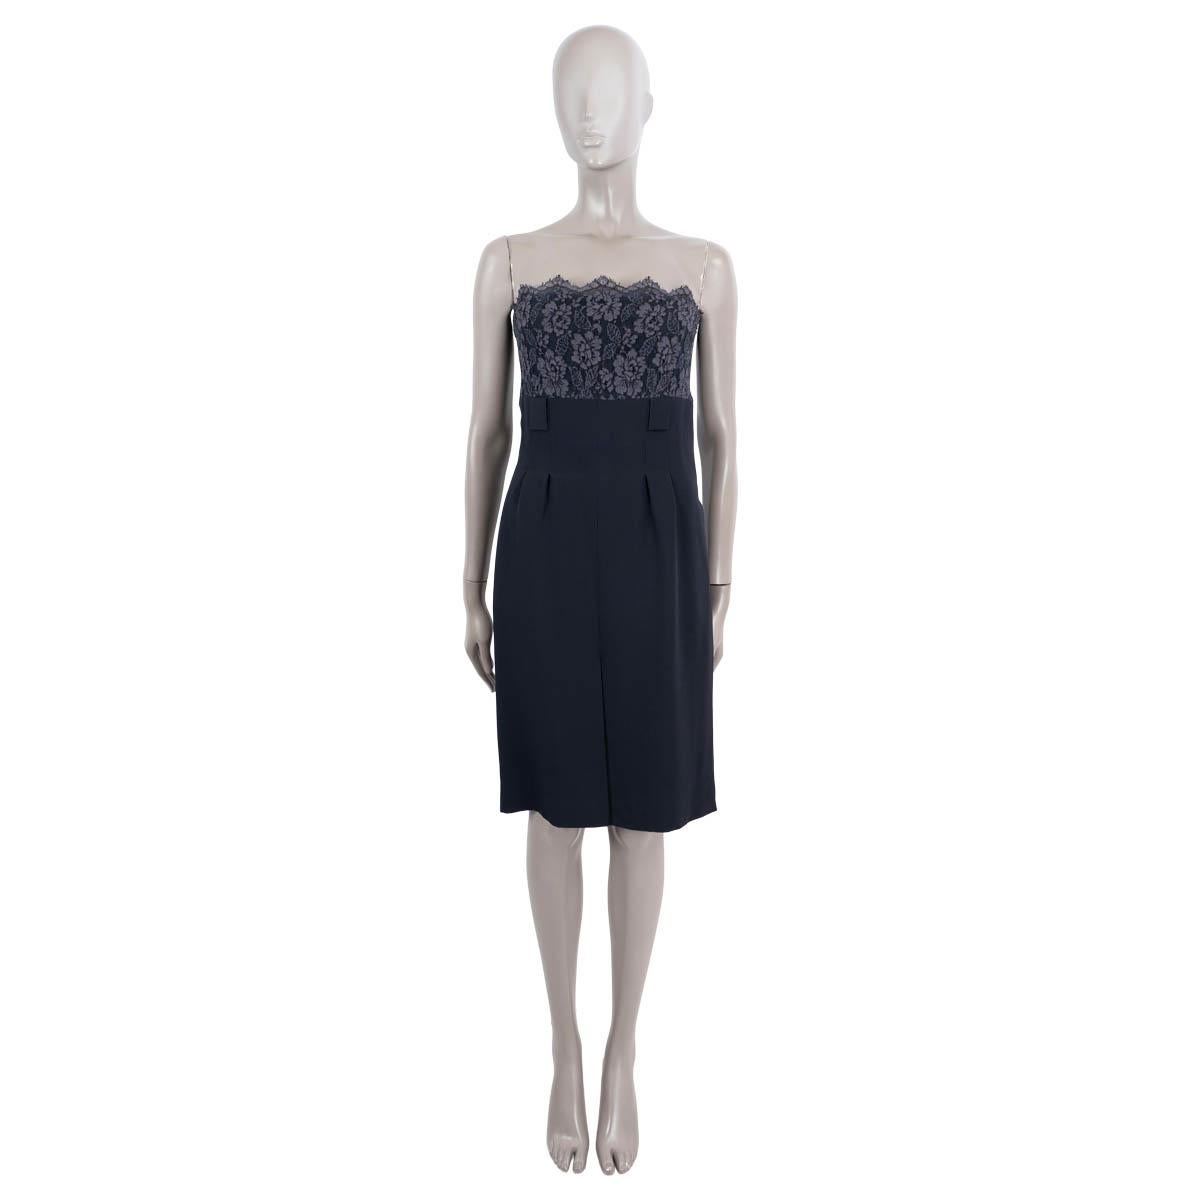 100% authentic Chanel cocktail dress in dark blue silk (100%) with top part in lace. Opens with zipper on the back. Lined. Belt around the waist is missing. Has been worn and is in excellent condition.

2007 Fall/Winter

Measurements
Model	07A